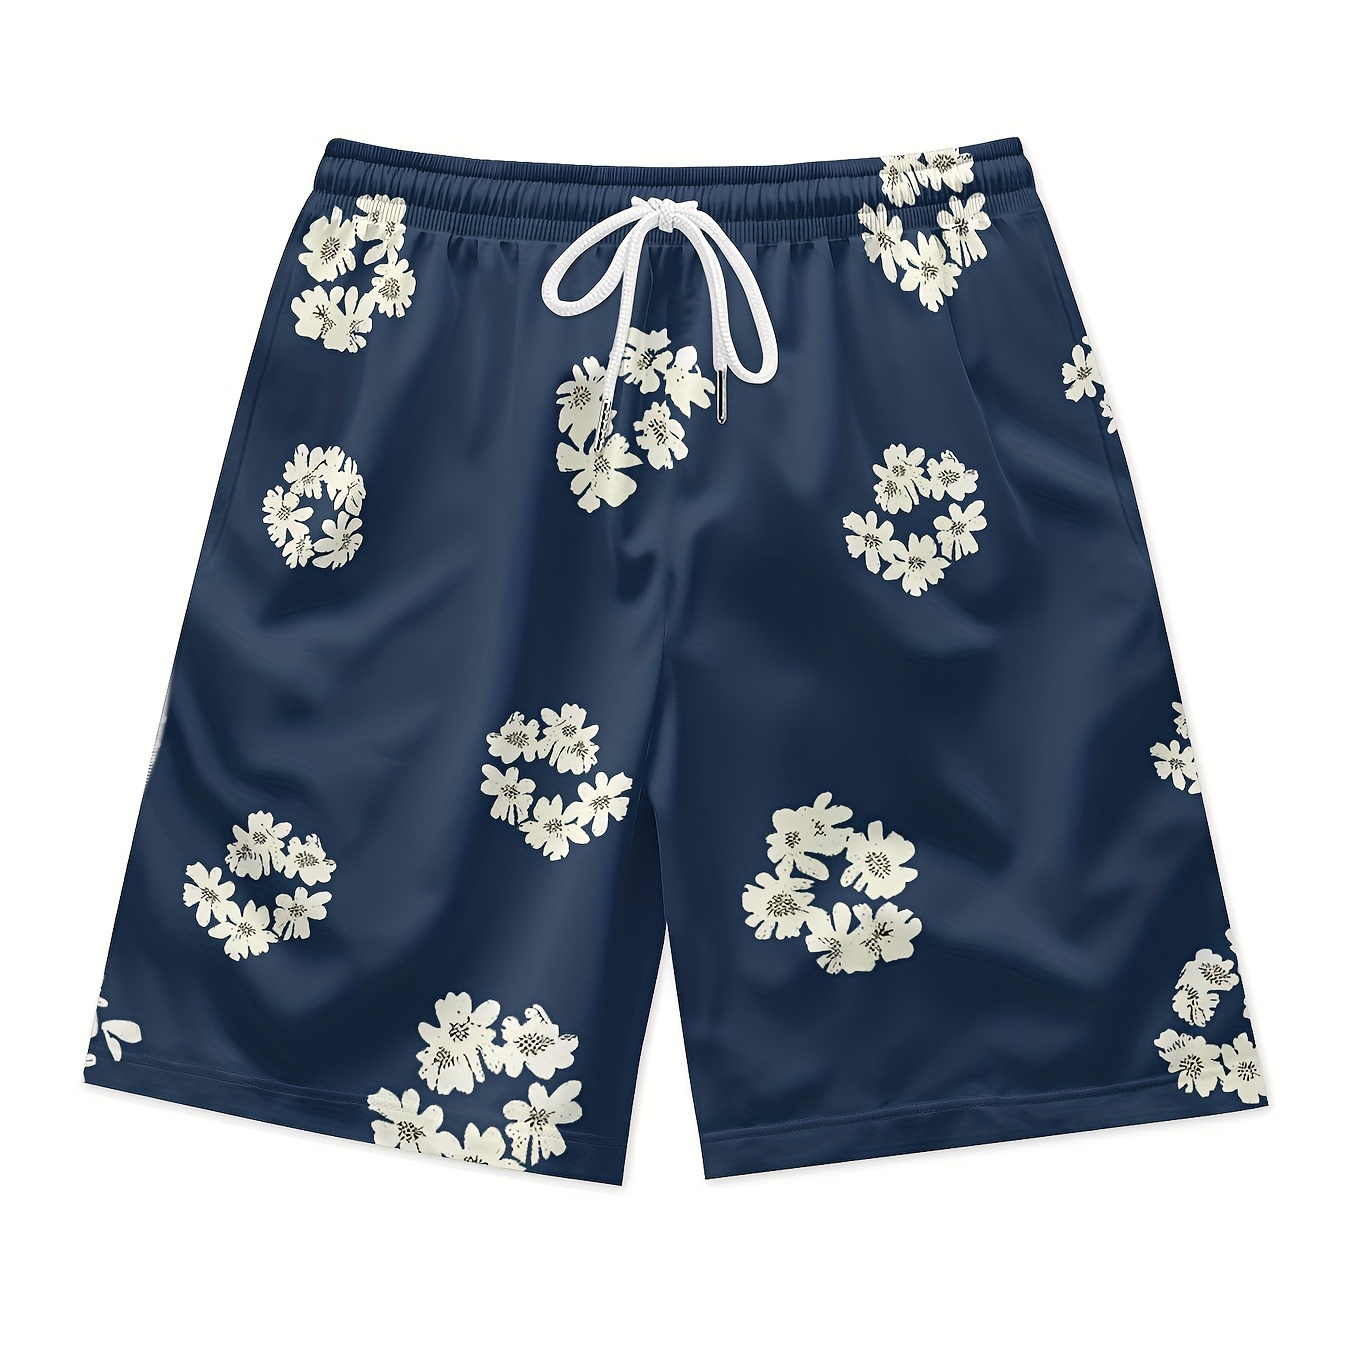 

Floral Print Men's Dark Blue Waist Shorts Quick Dry Breathable Polyester Shorts Daily Streetwear Vacation Shorts Clothing Bottoms